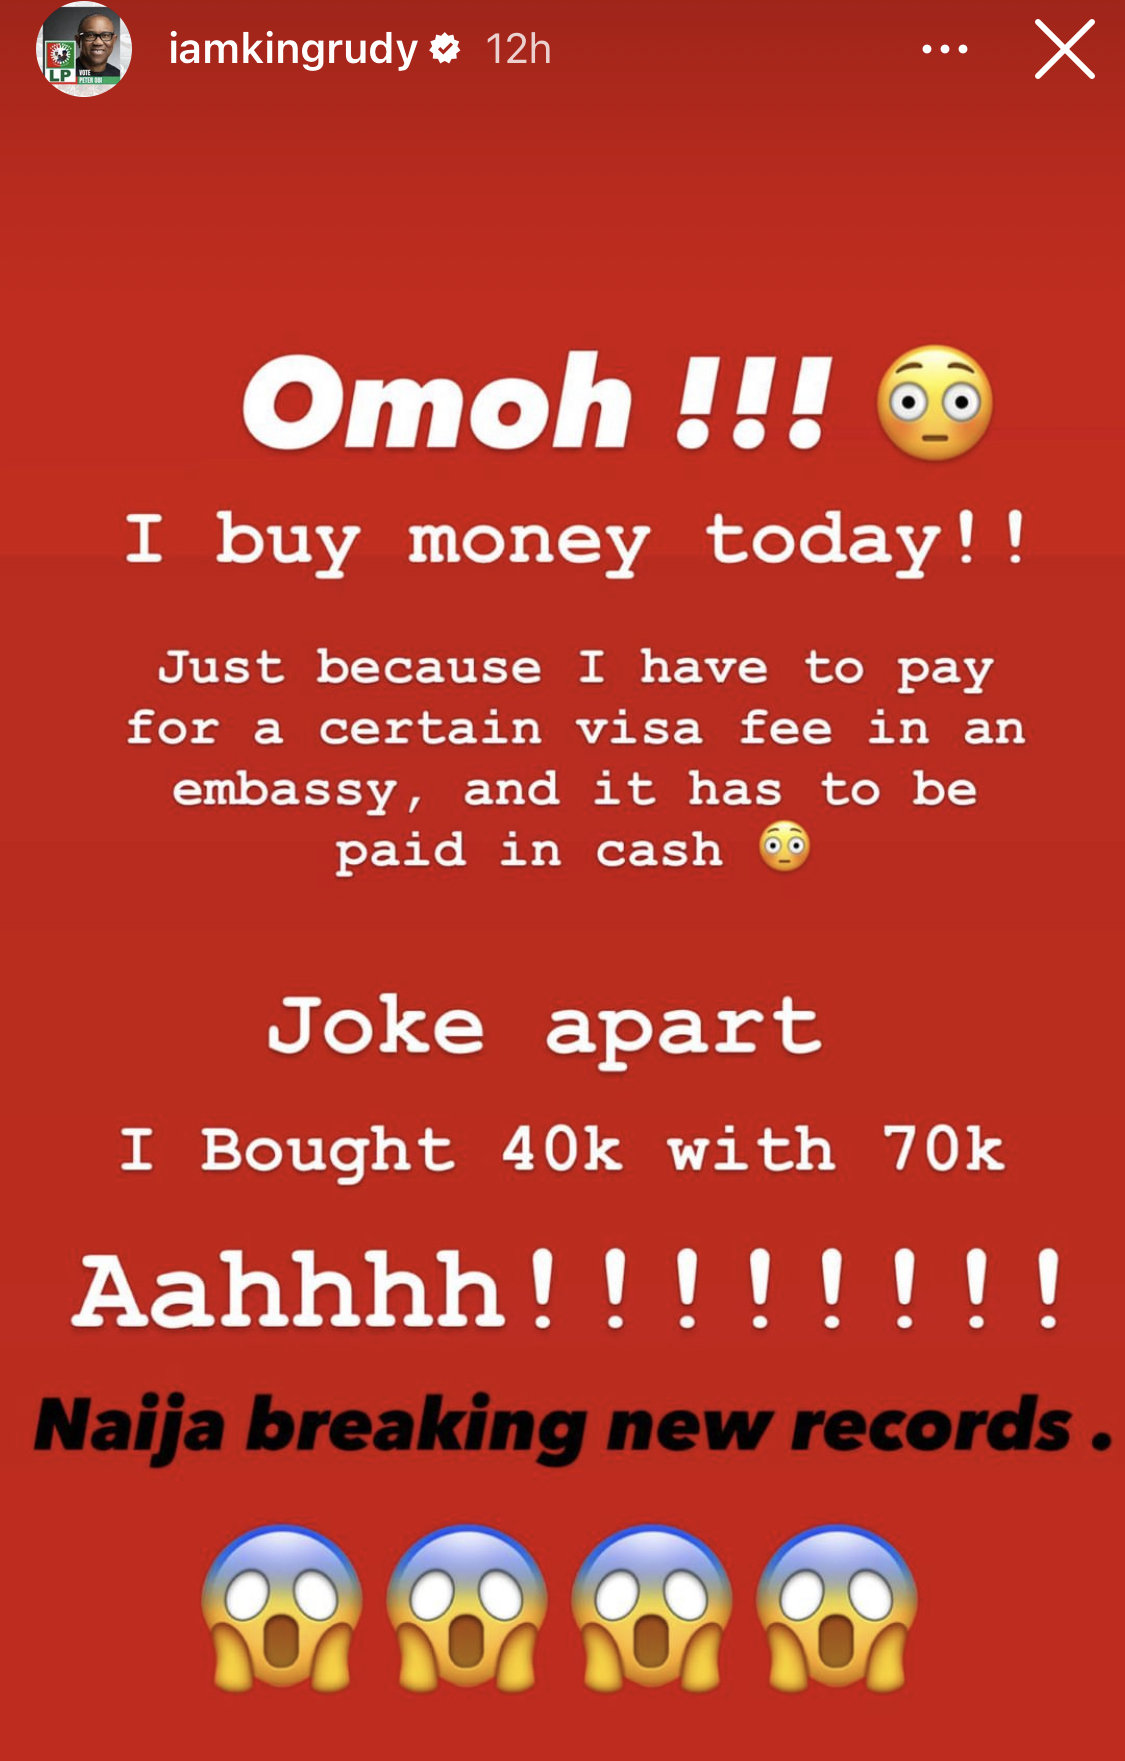 I bought 40k with 70k - Singer Paul Okoye Cries Out